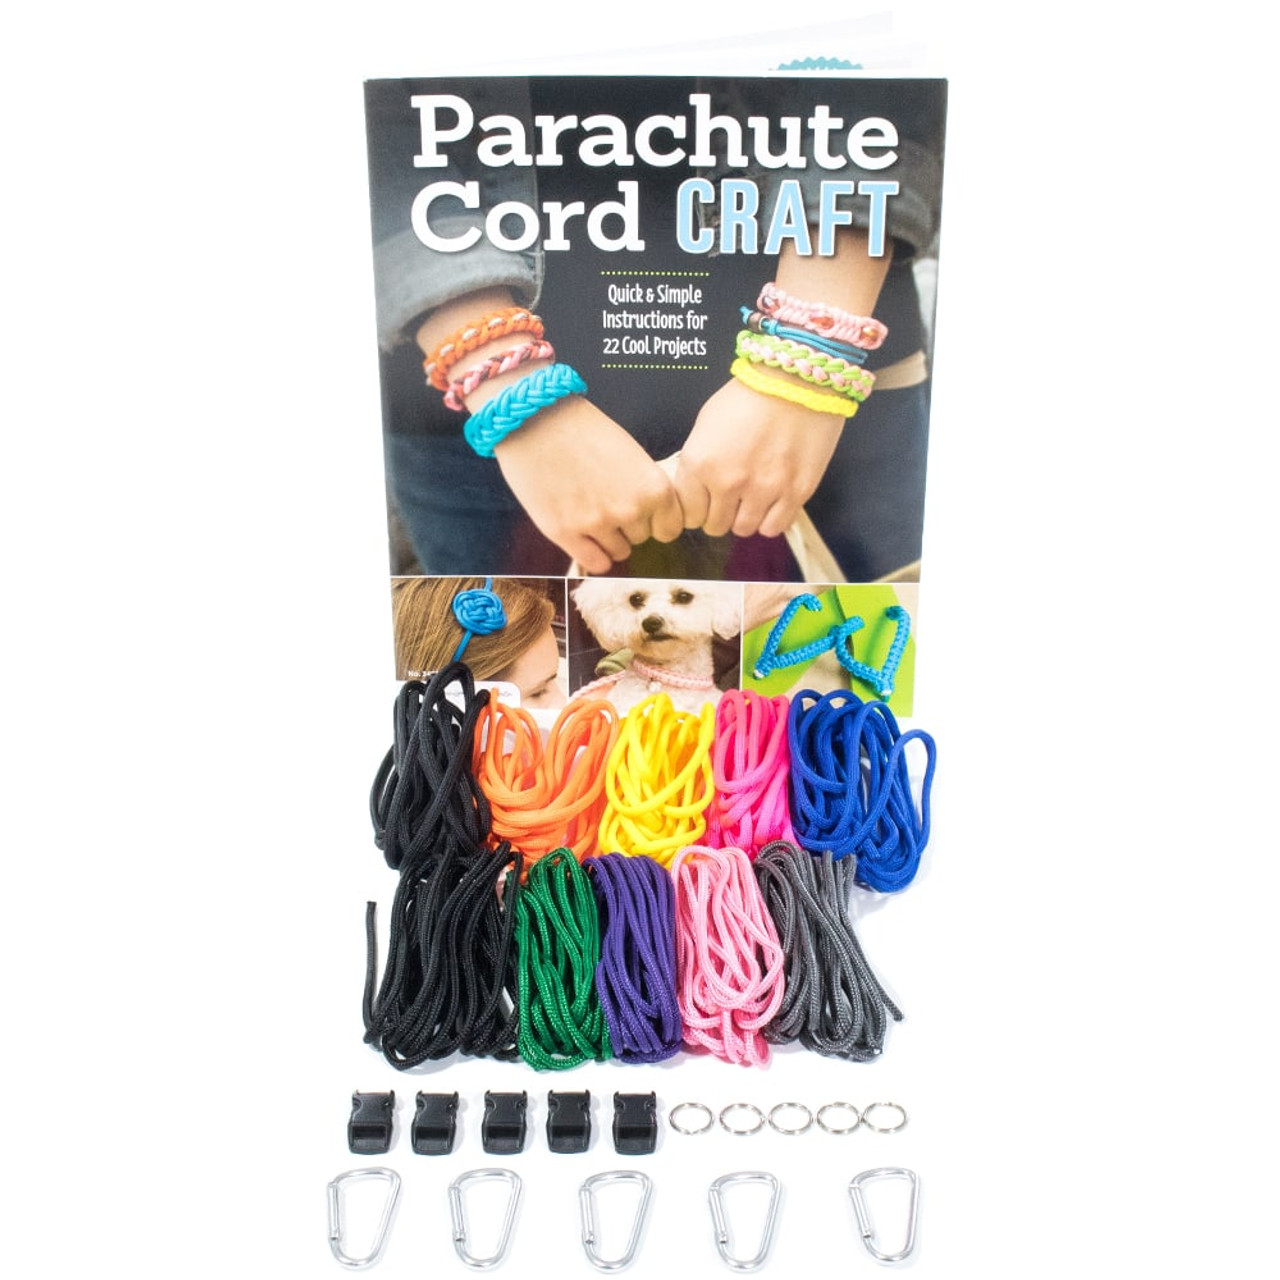 22 Quick Parachute Cord Crafts Book and Kit